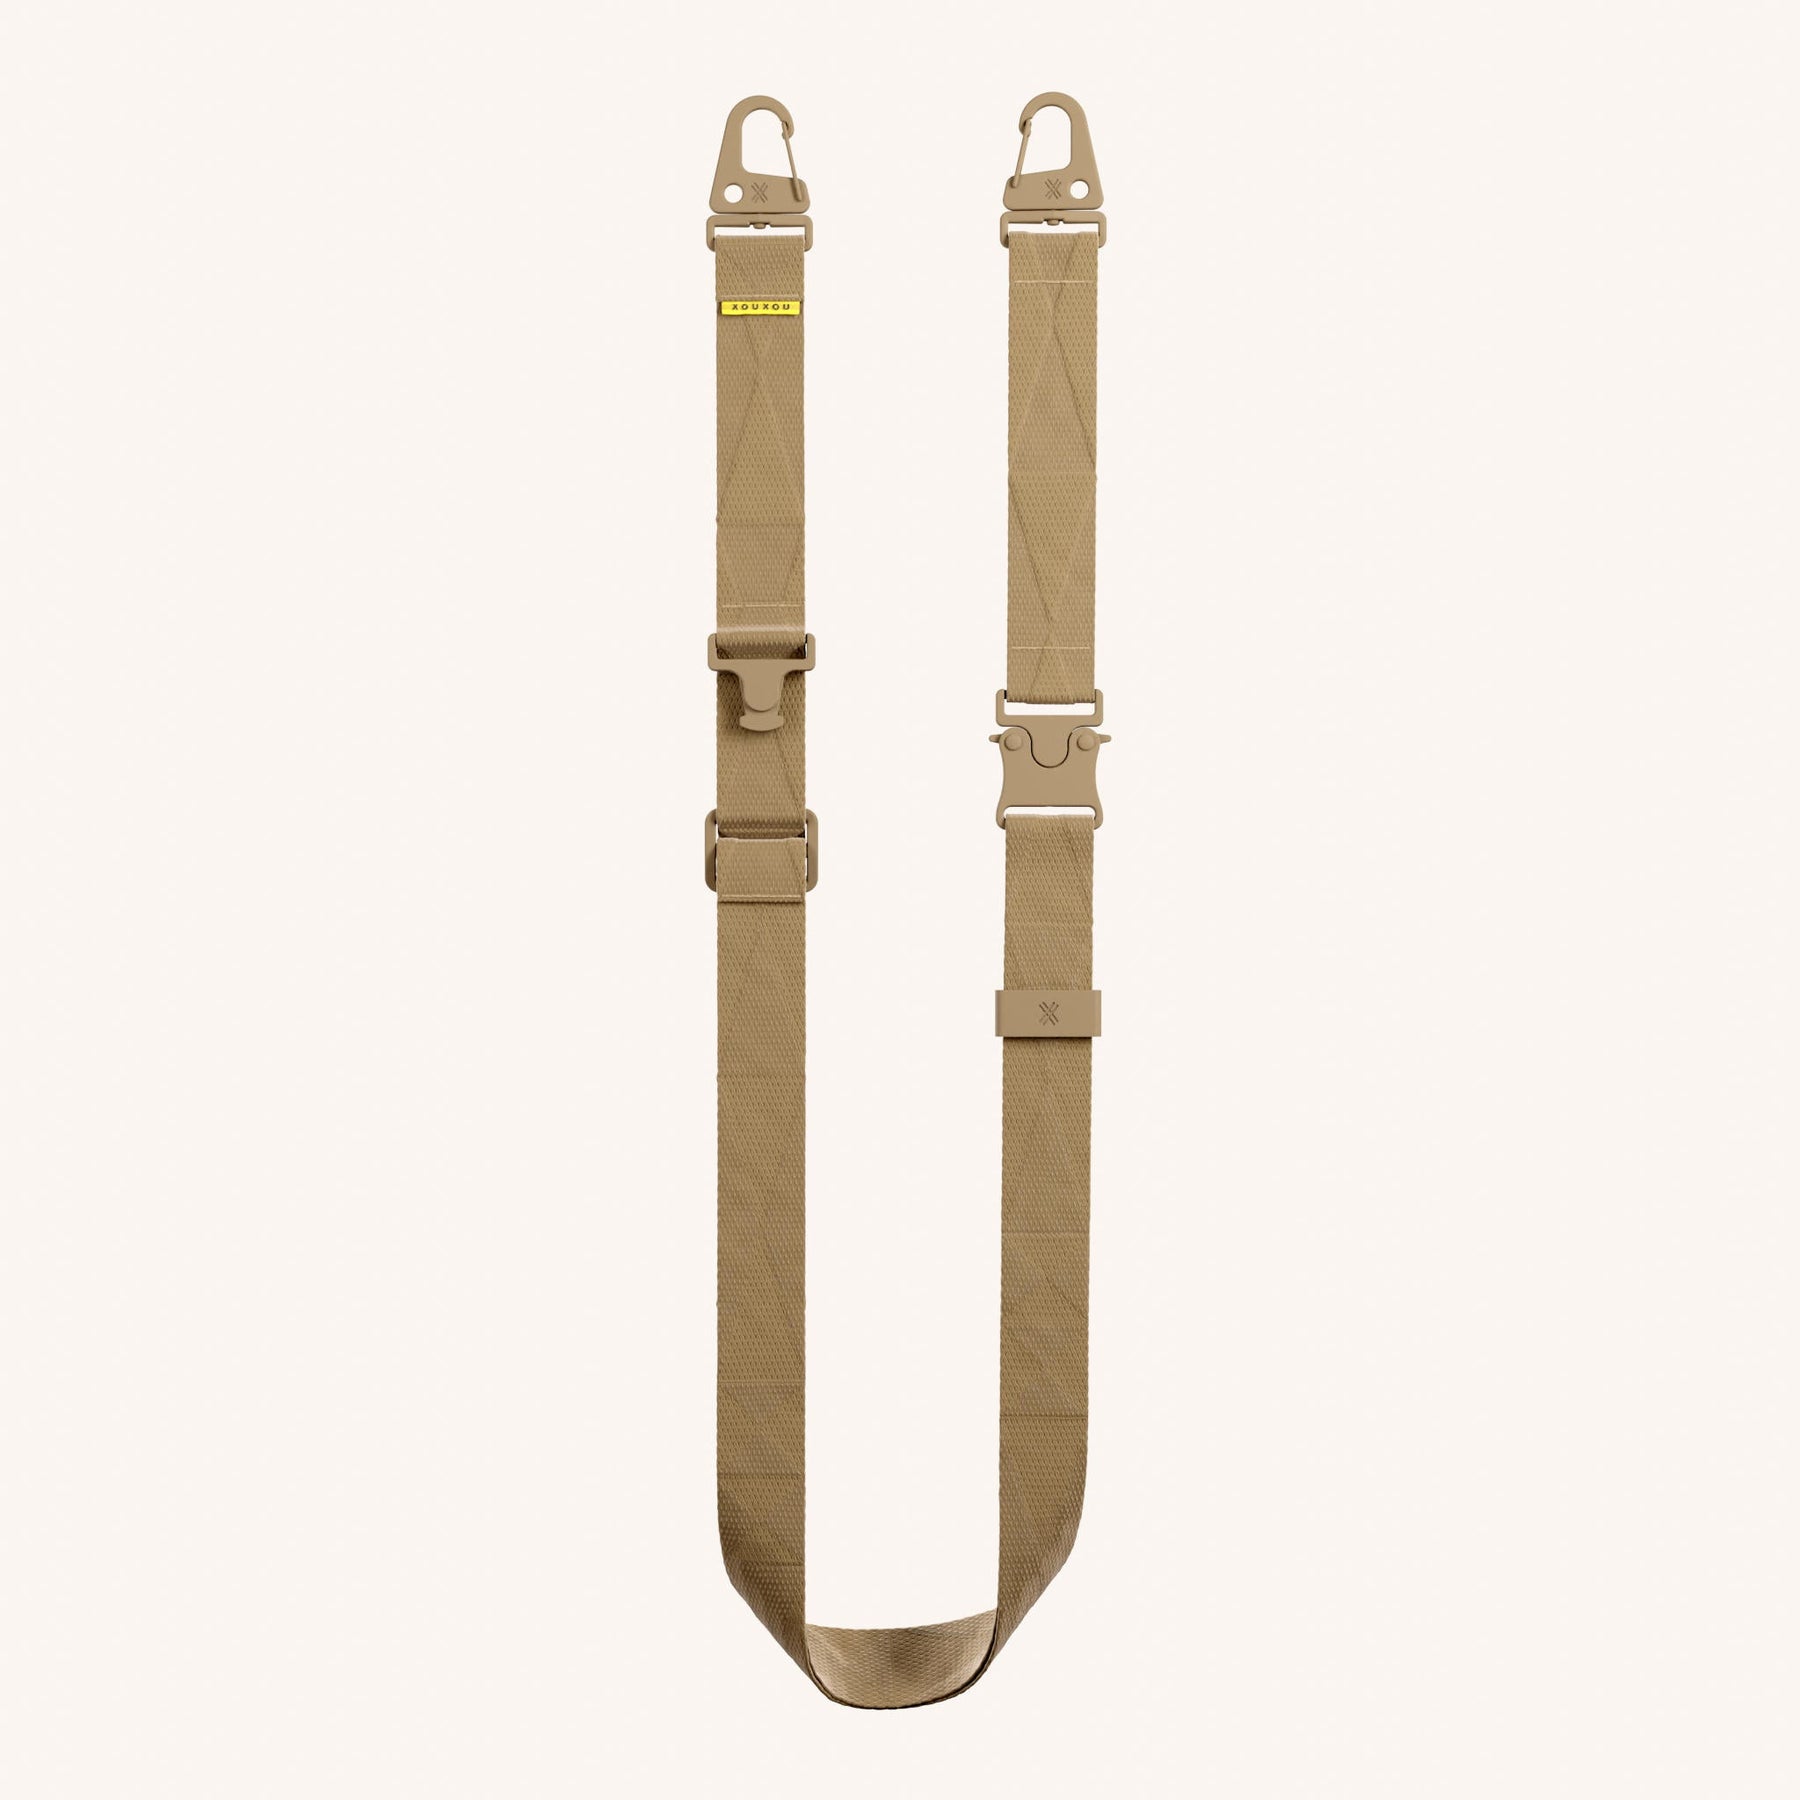 Phone Strap Lanyard in Sand Total View | XOUXOU